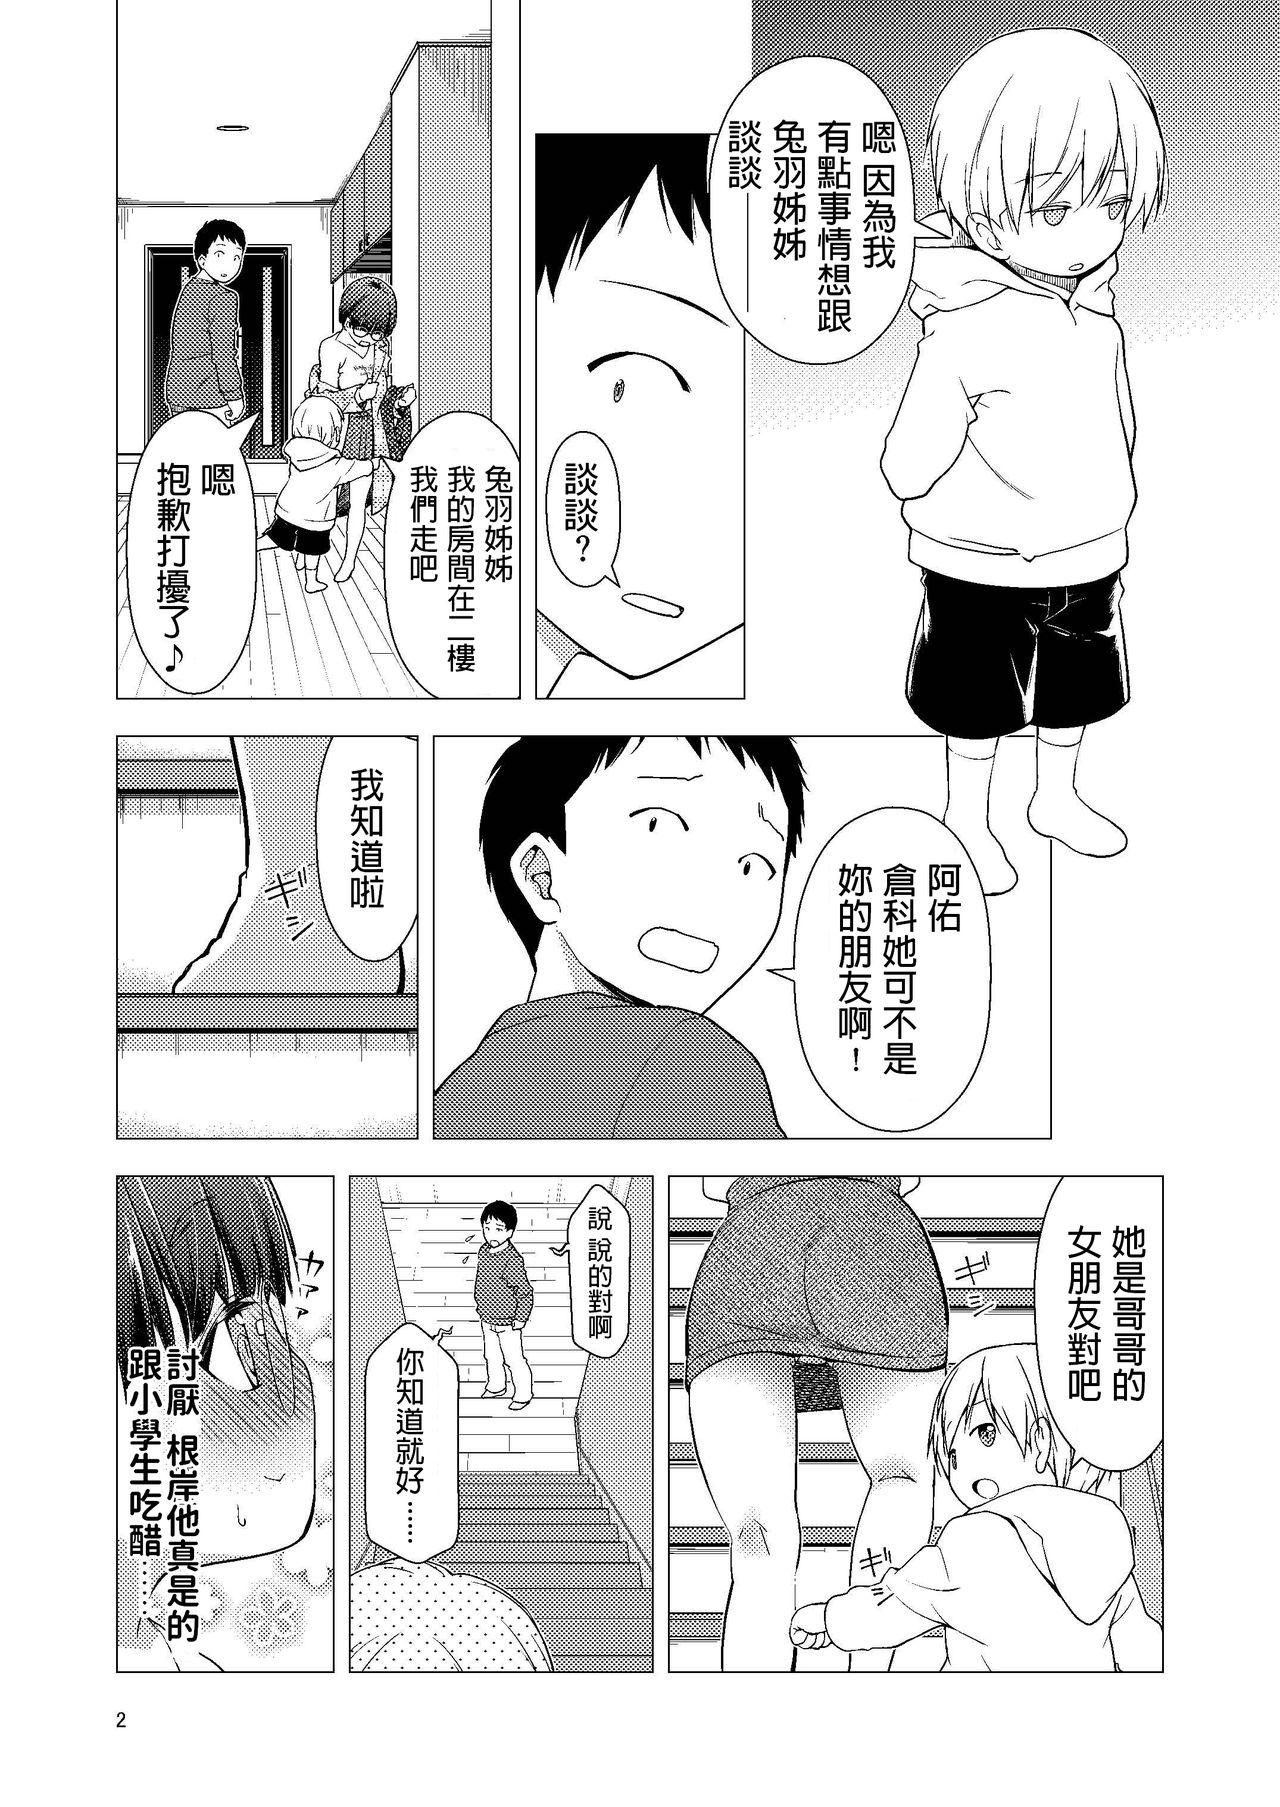 Mature お兄ちゃんの彼女 中文翻譯 - Original Pussy Play - Page 4